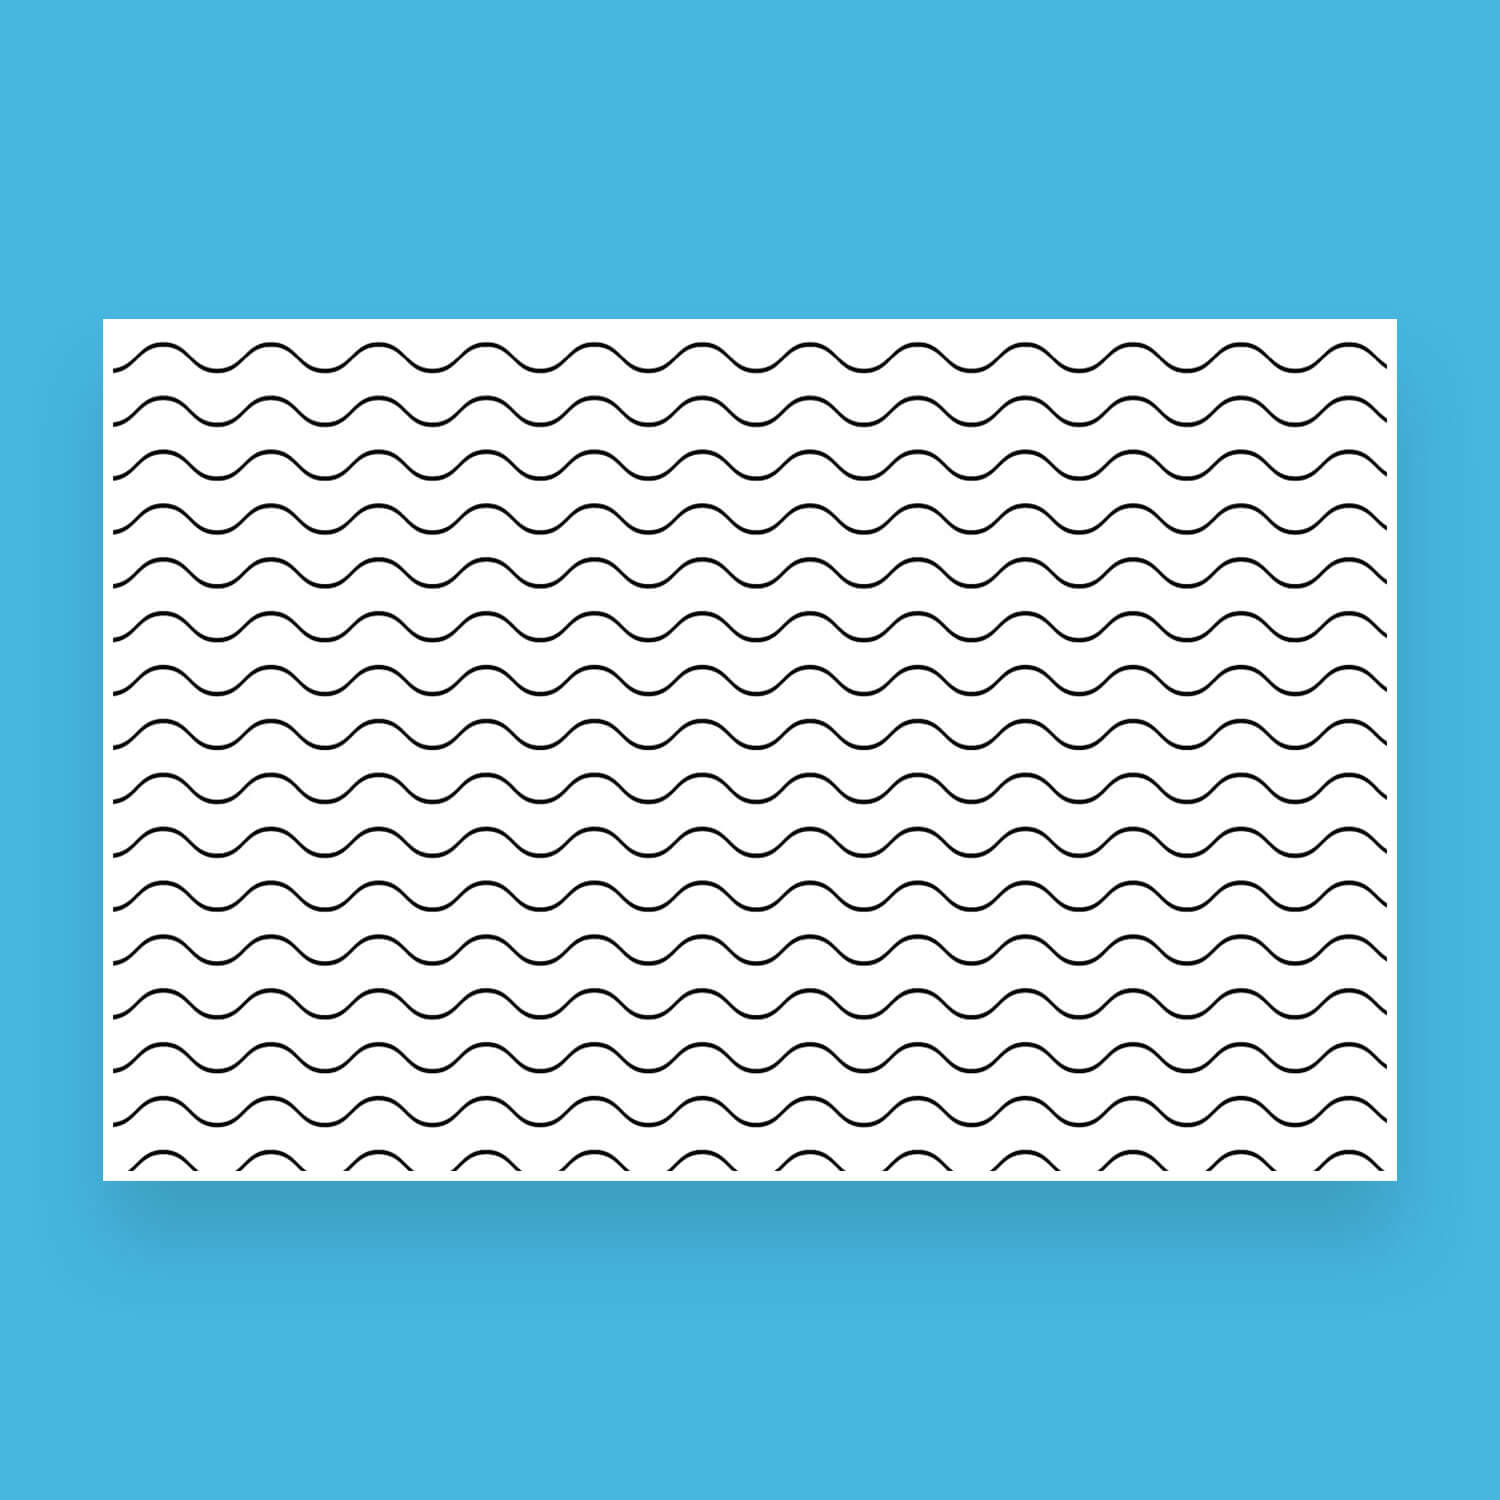 Thin wave zigzag seamless patterns on a turquoise background.